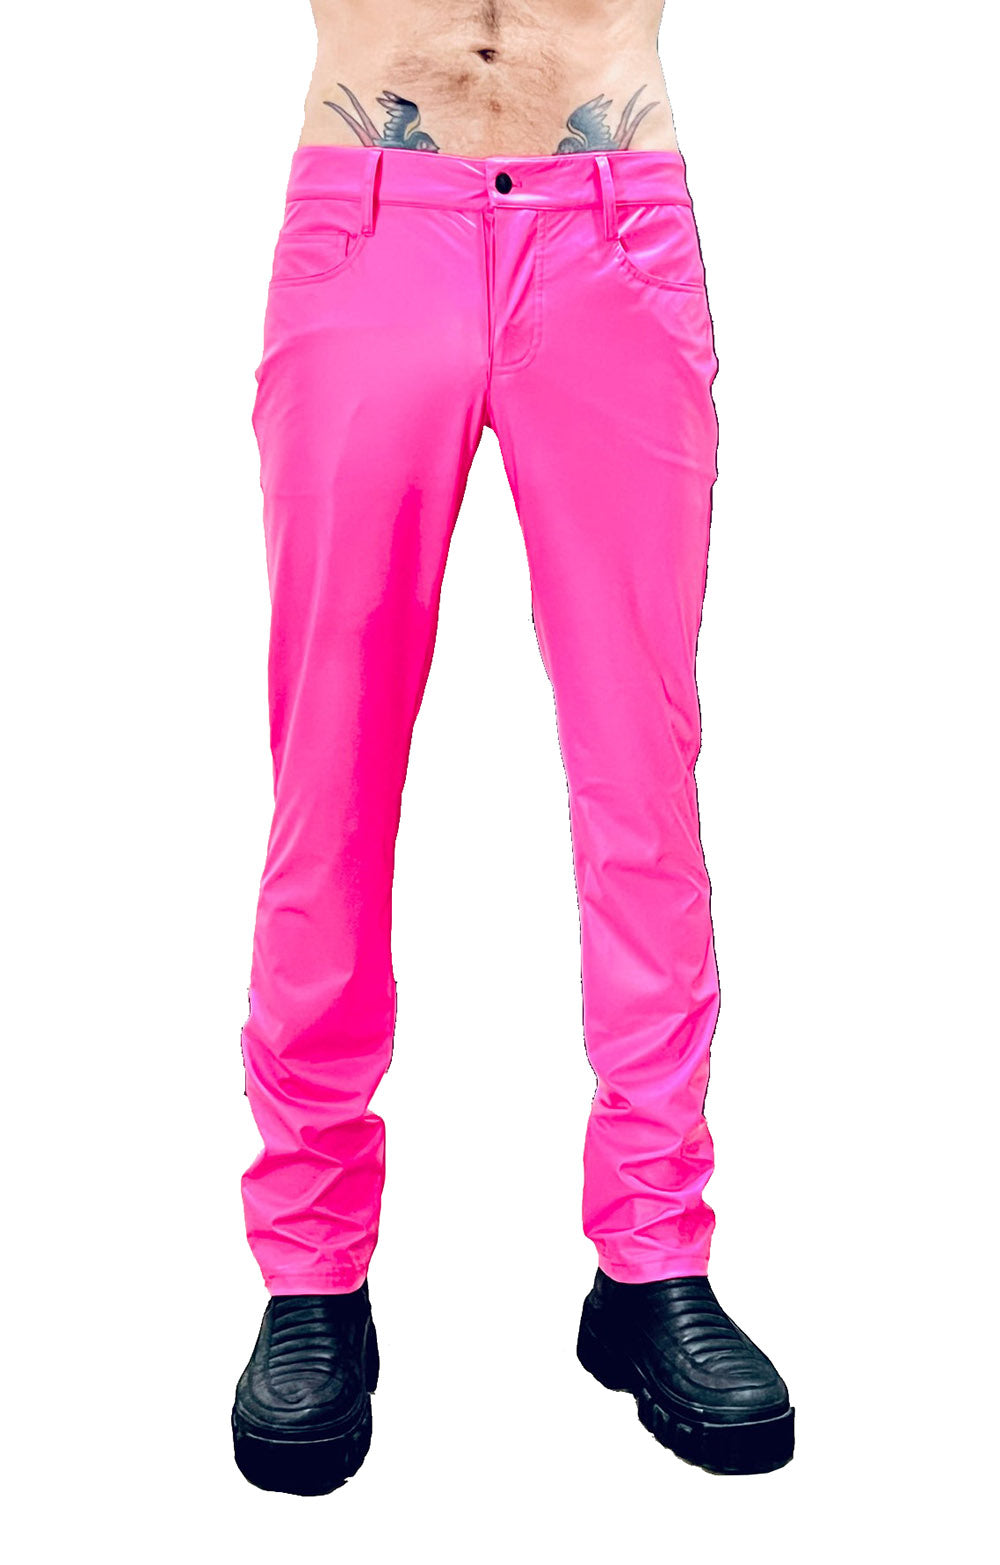 mens hot pink jeans